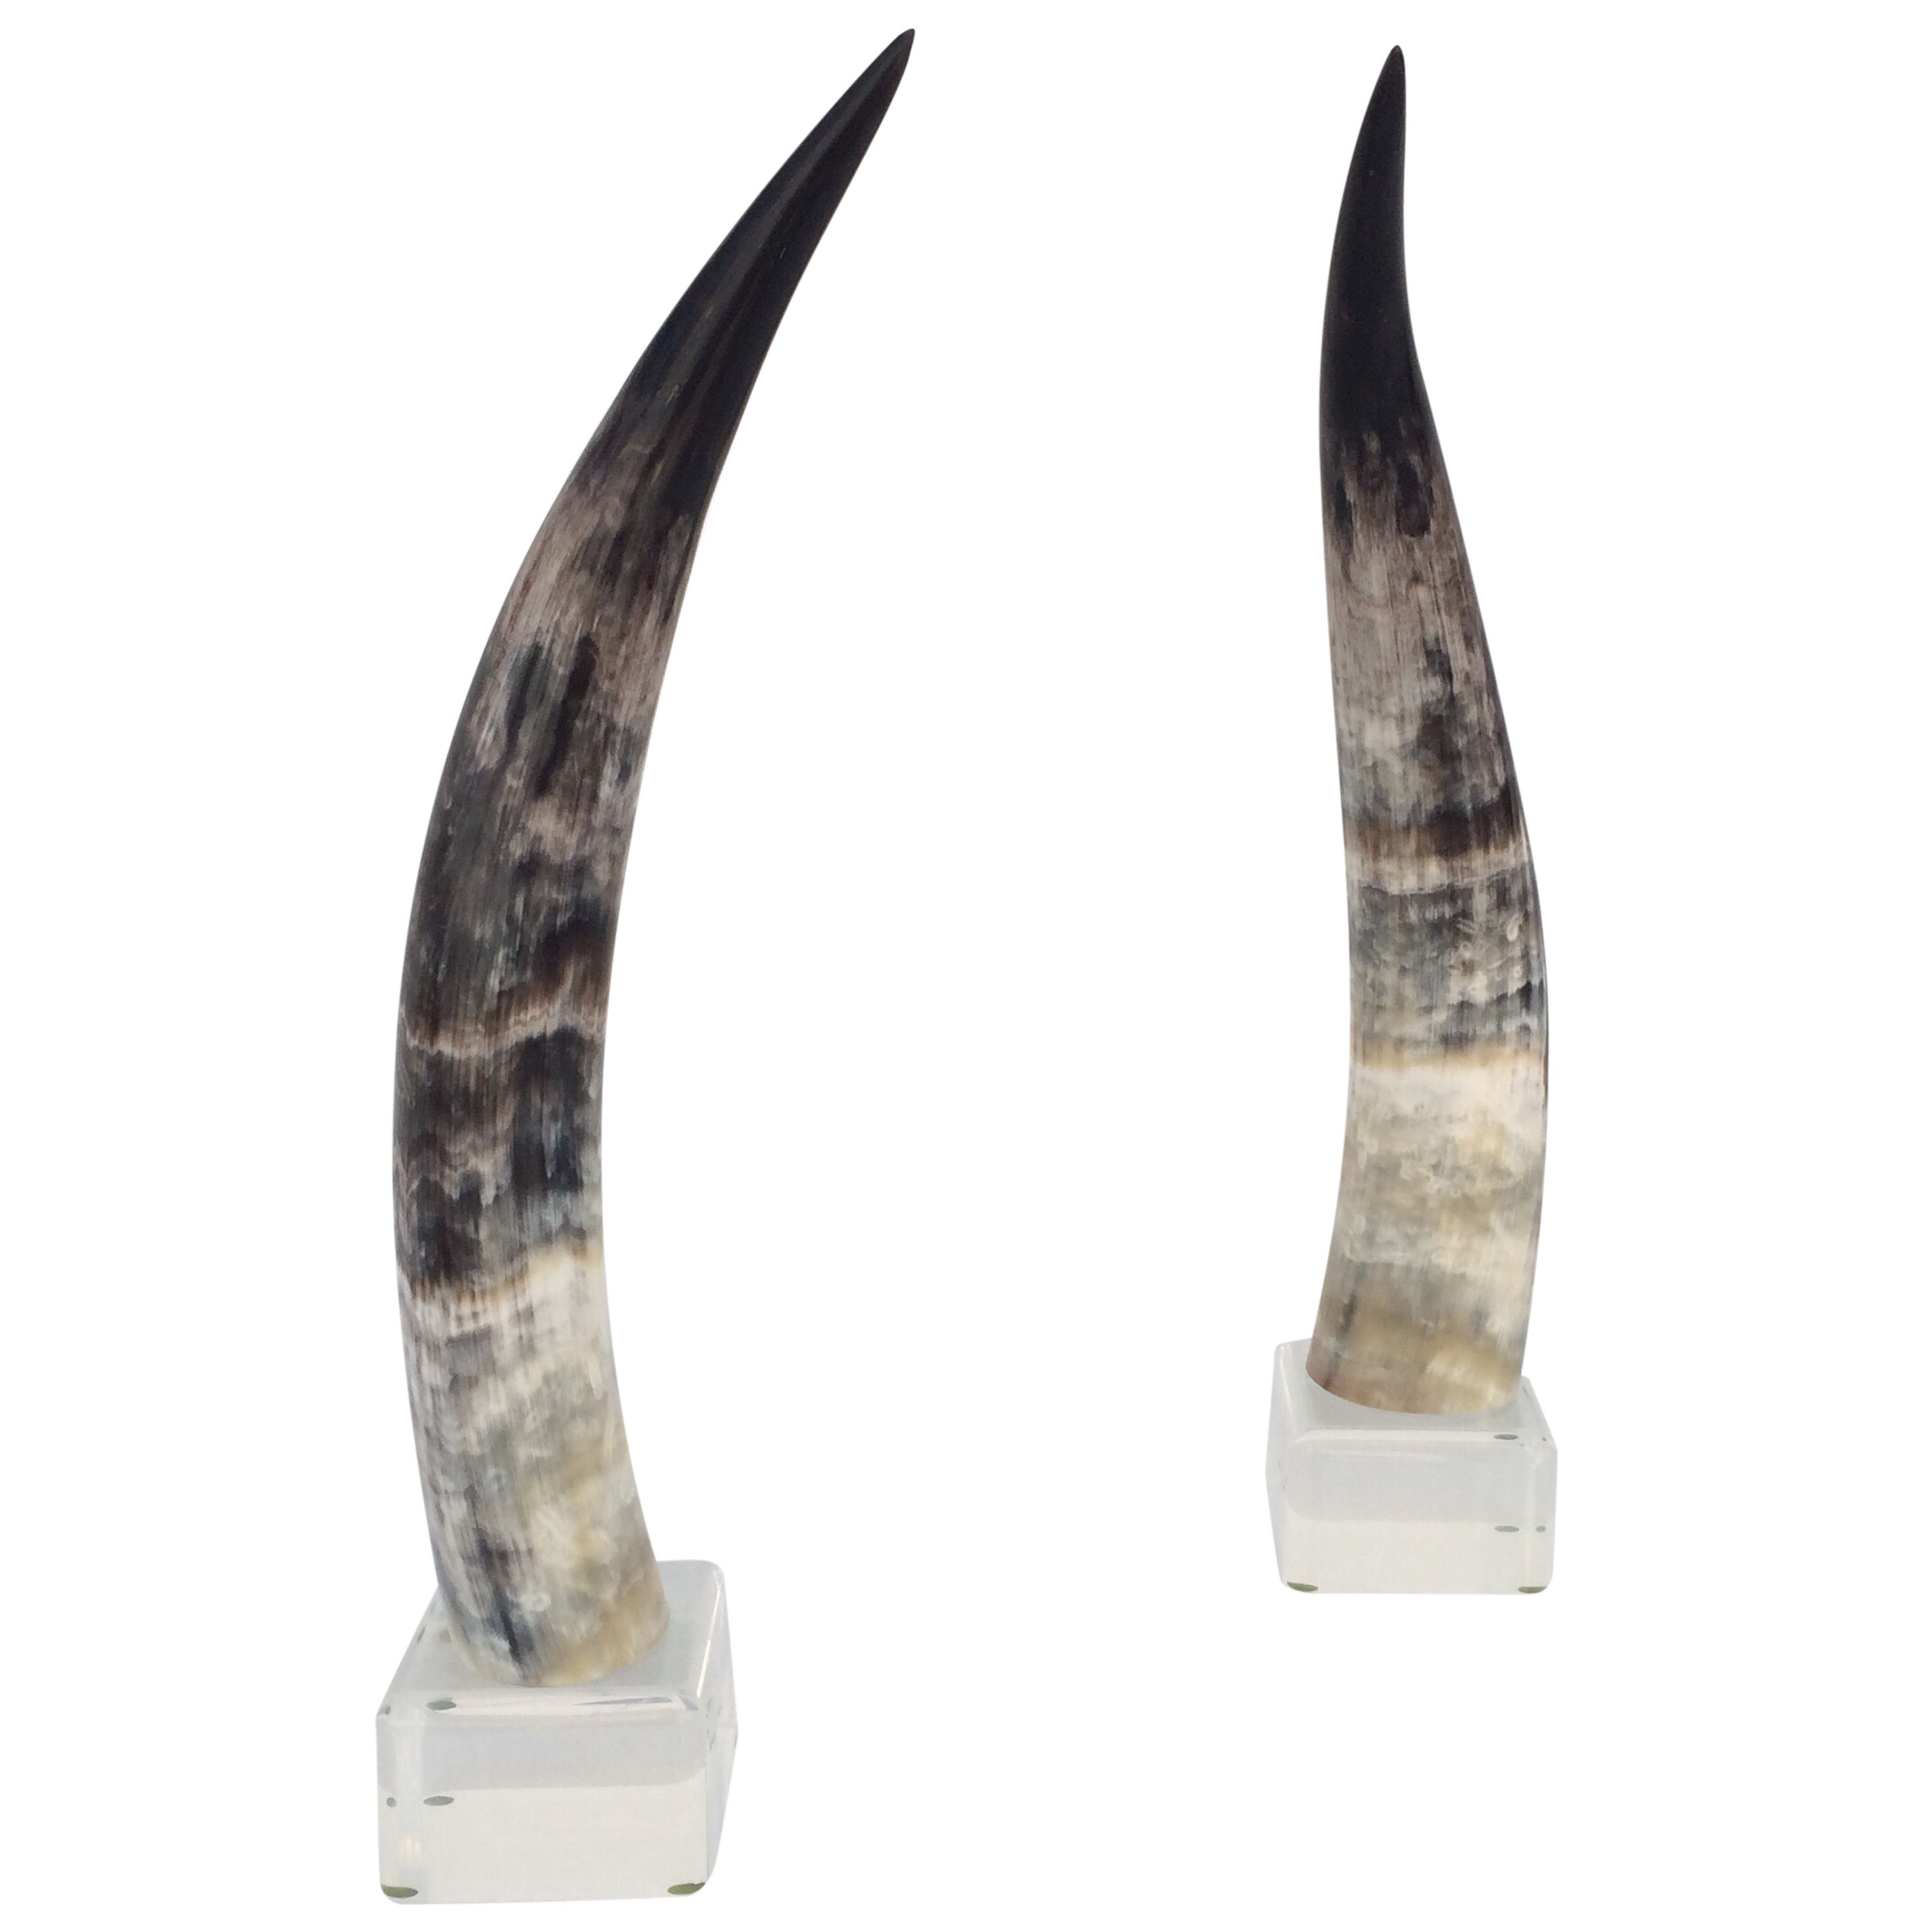 Pair of Mounted Steer Horns on Acrylic Bases